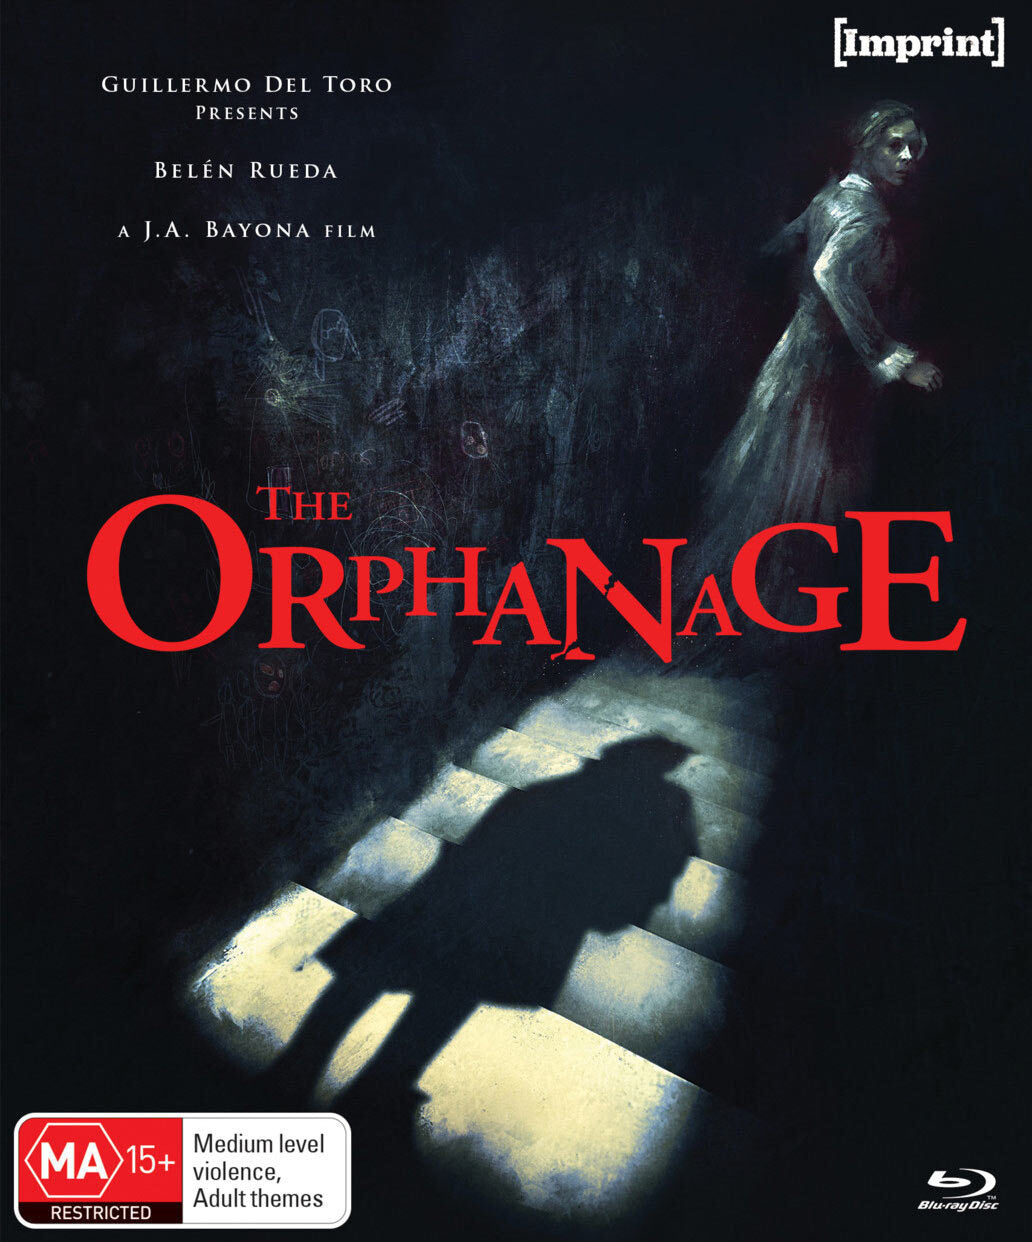 The Orphanage (2007) - front cover